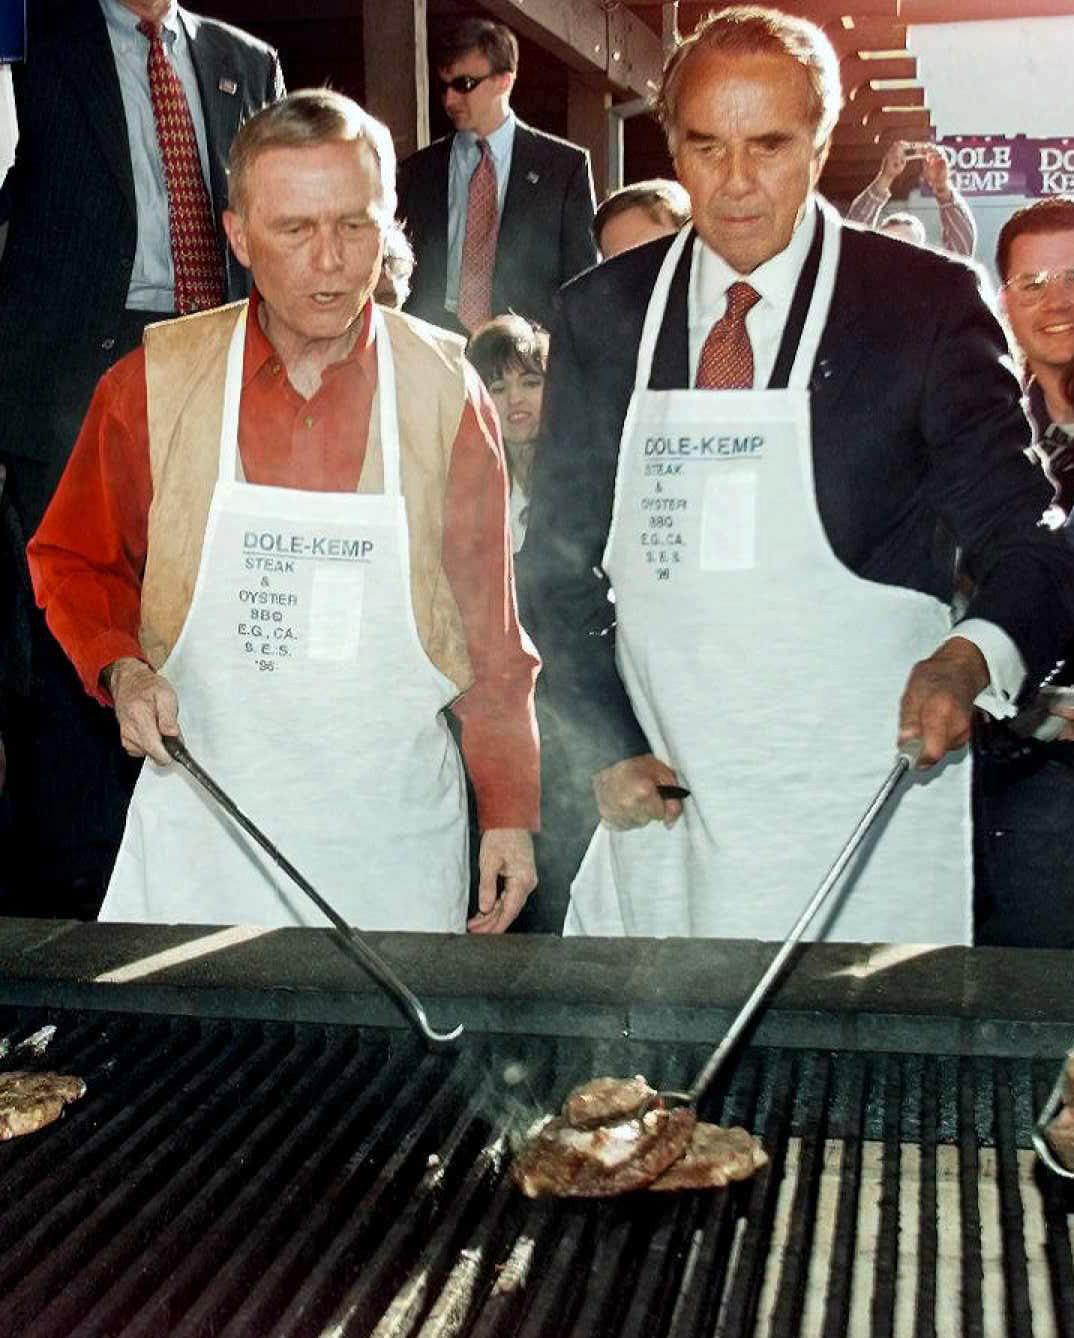 Republican presidential candidate Bob Dole and California Governor Pete Wilson grill a steak during the annual Republican steak and Oyster Feed in Sacramento, Calif., Oct. 27, 1996. Dole was in the middle of a three day campaign trip through California.